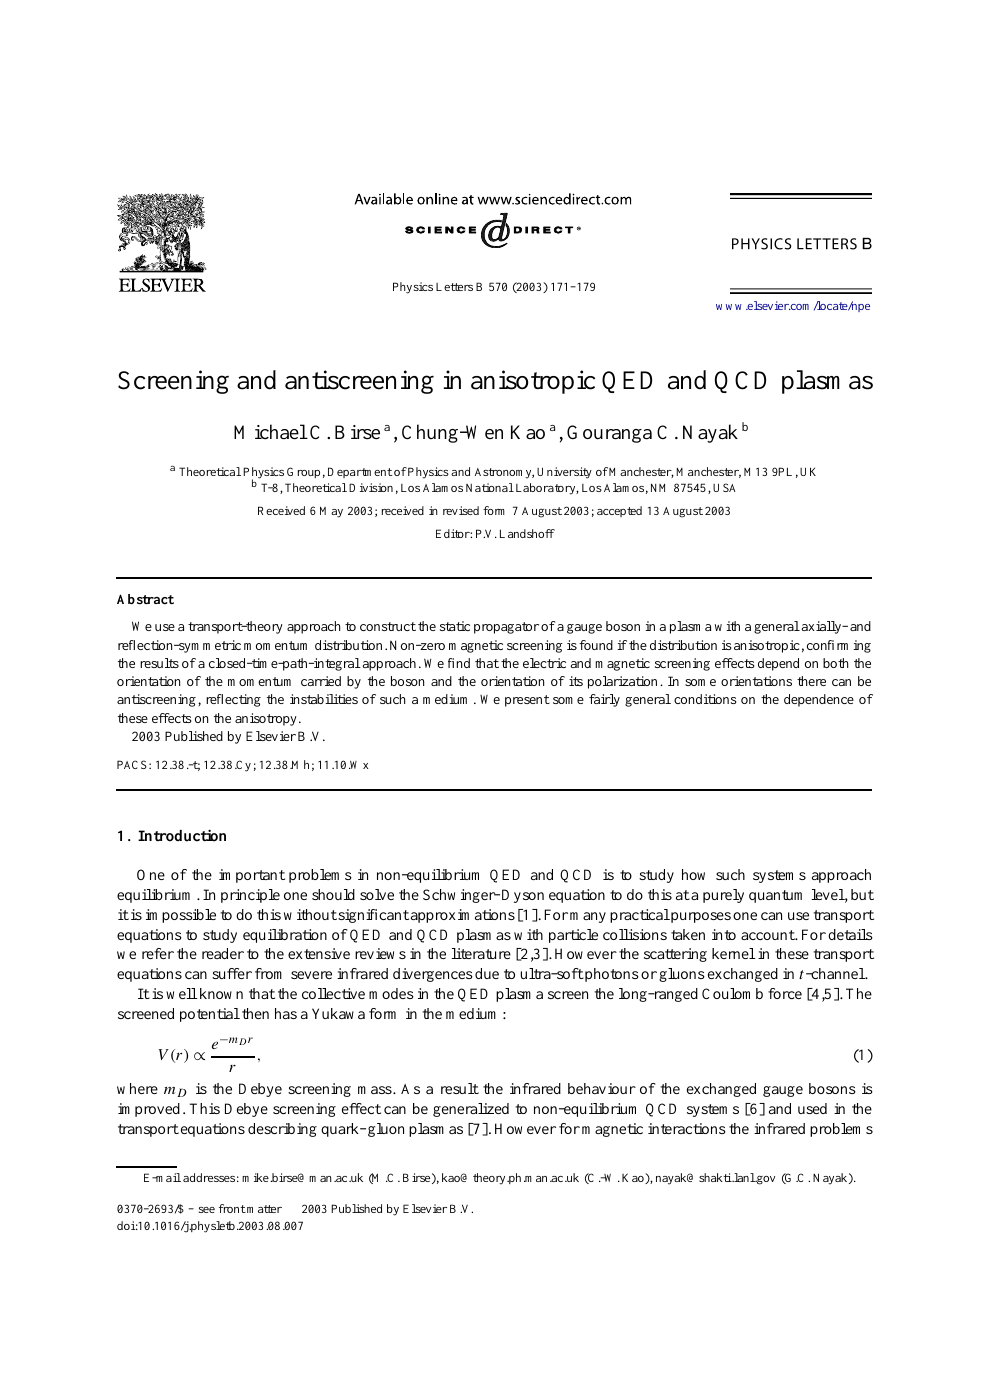 Screening And Antiscreening In Anisotropic Qed And Qcd Plasmas Topic Of Research Paper In Physical Sciences Download Scholarly Article Pdf And Read For Free On Cyberleninka Open Science Hub